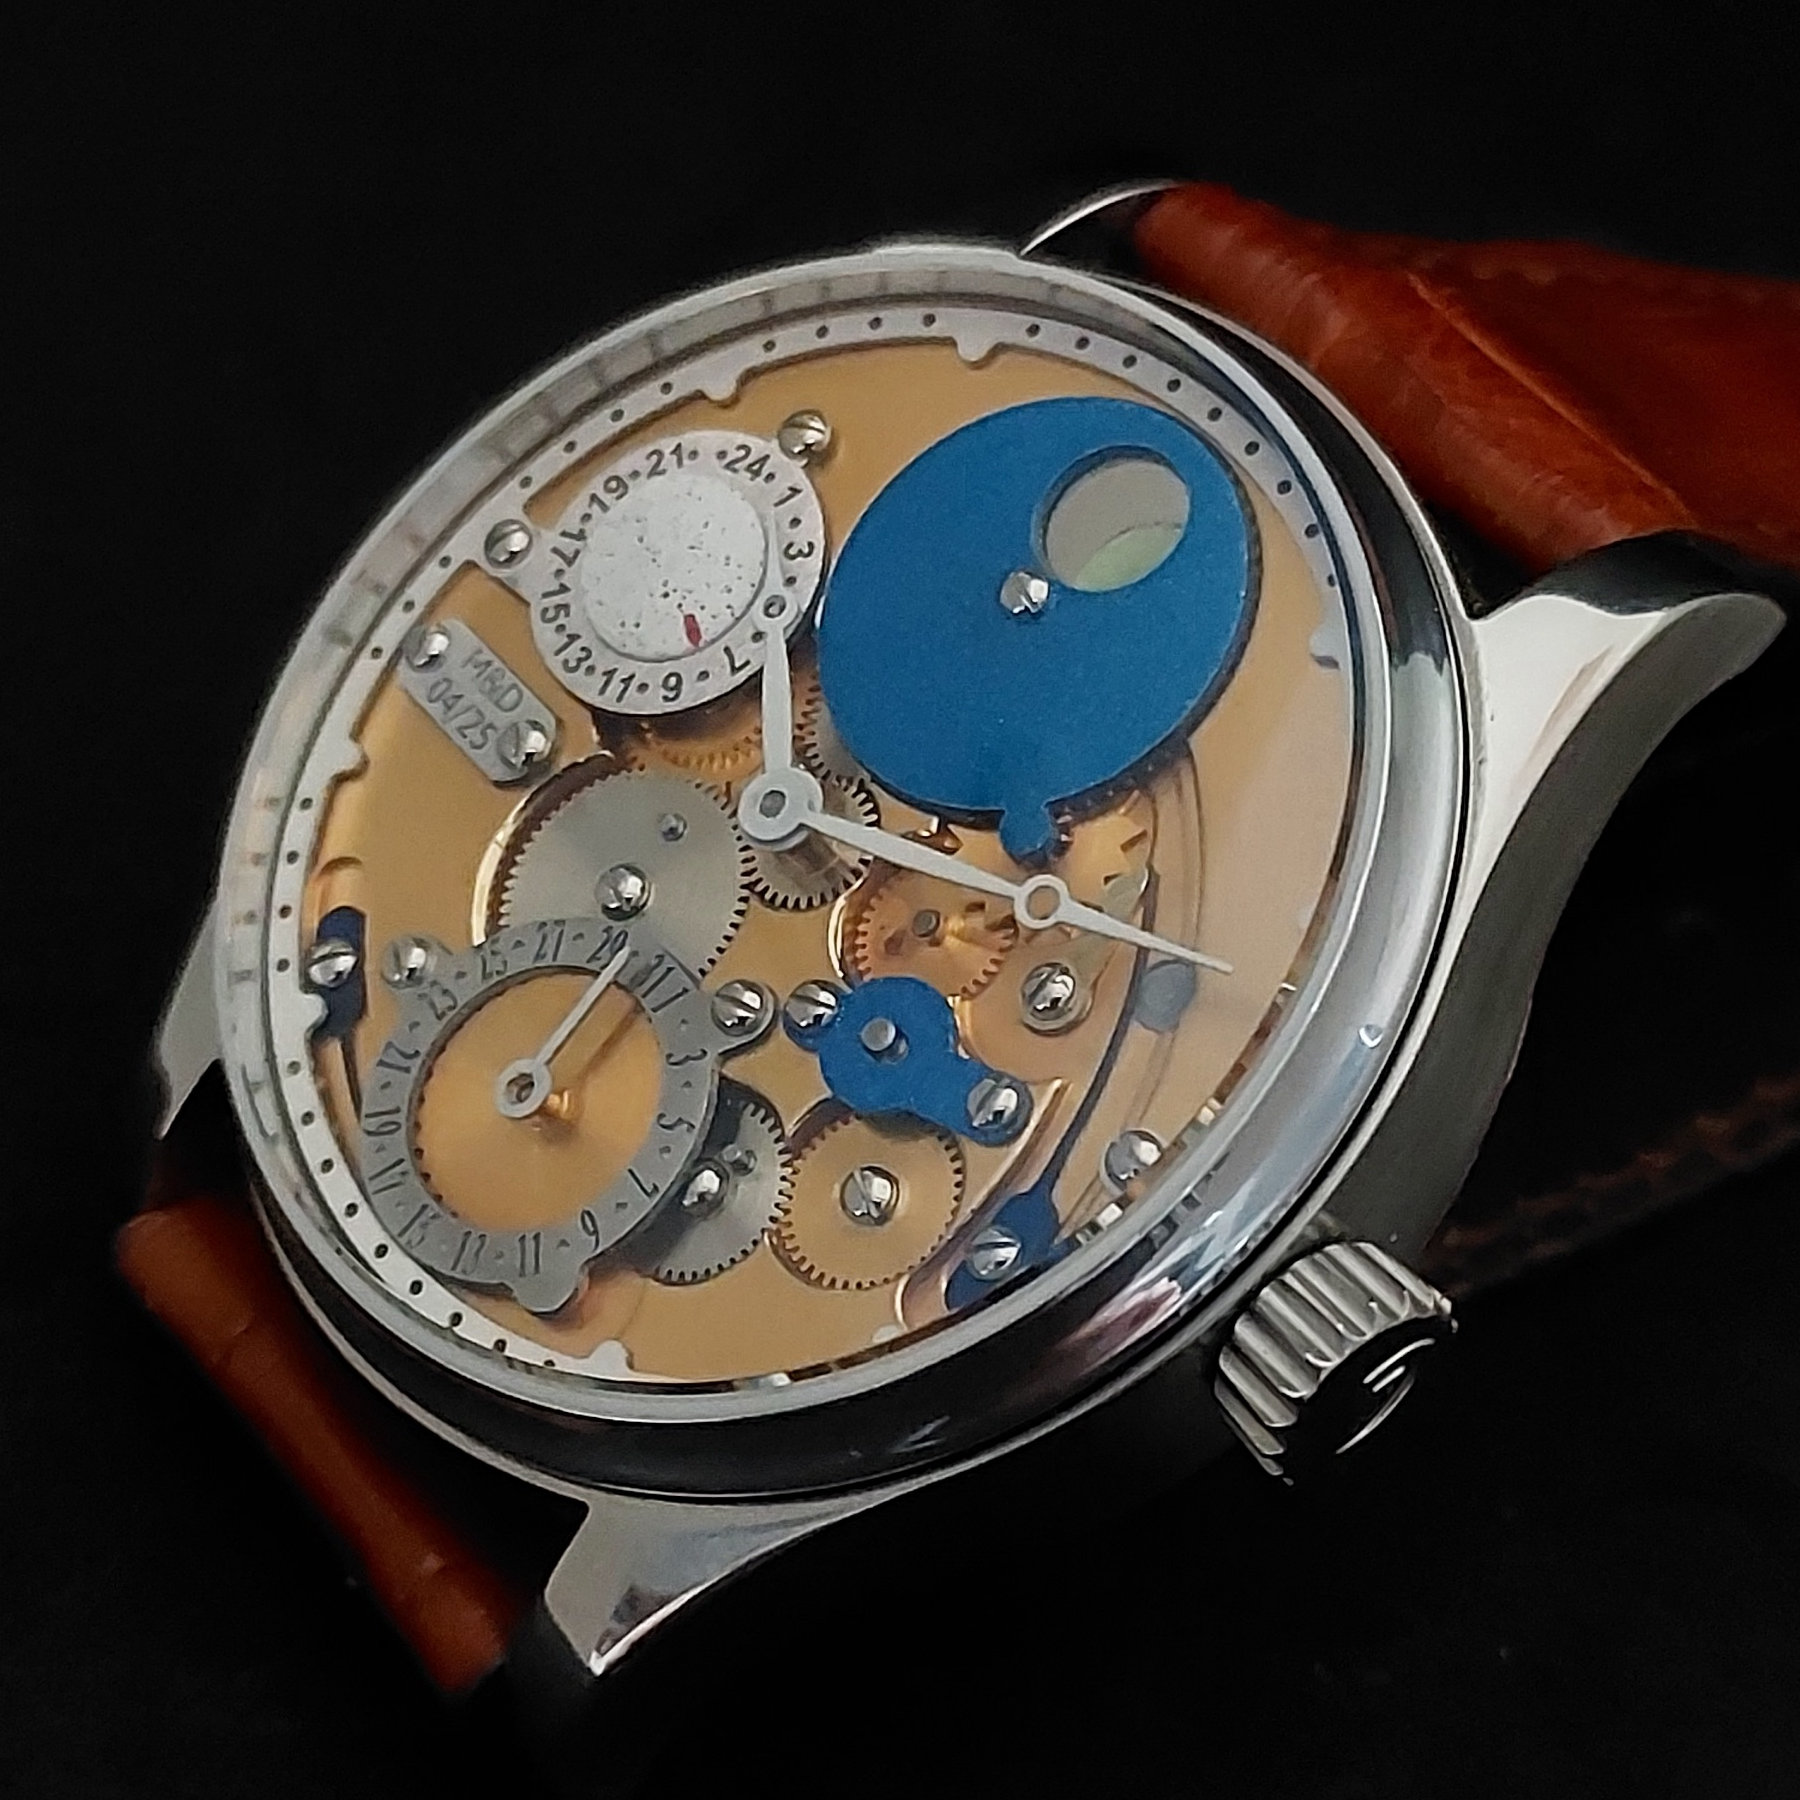 Marc & Darnò - Astronomical Watches - Moon Phase watch with Lunar Day indication - Interview - 2